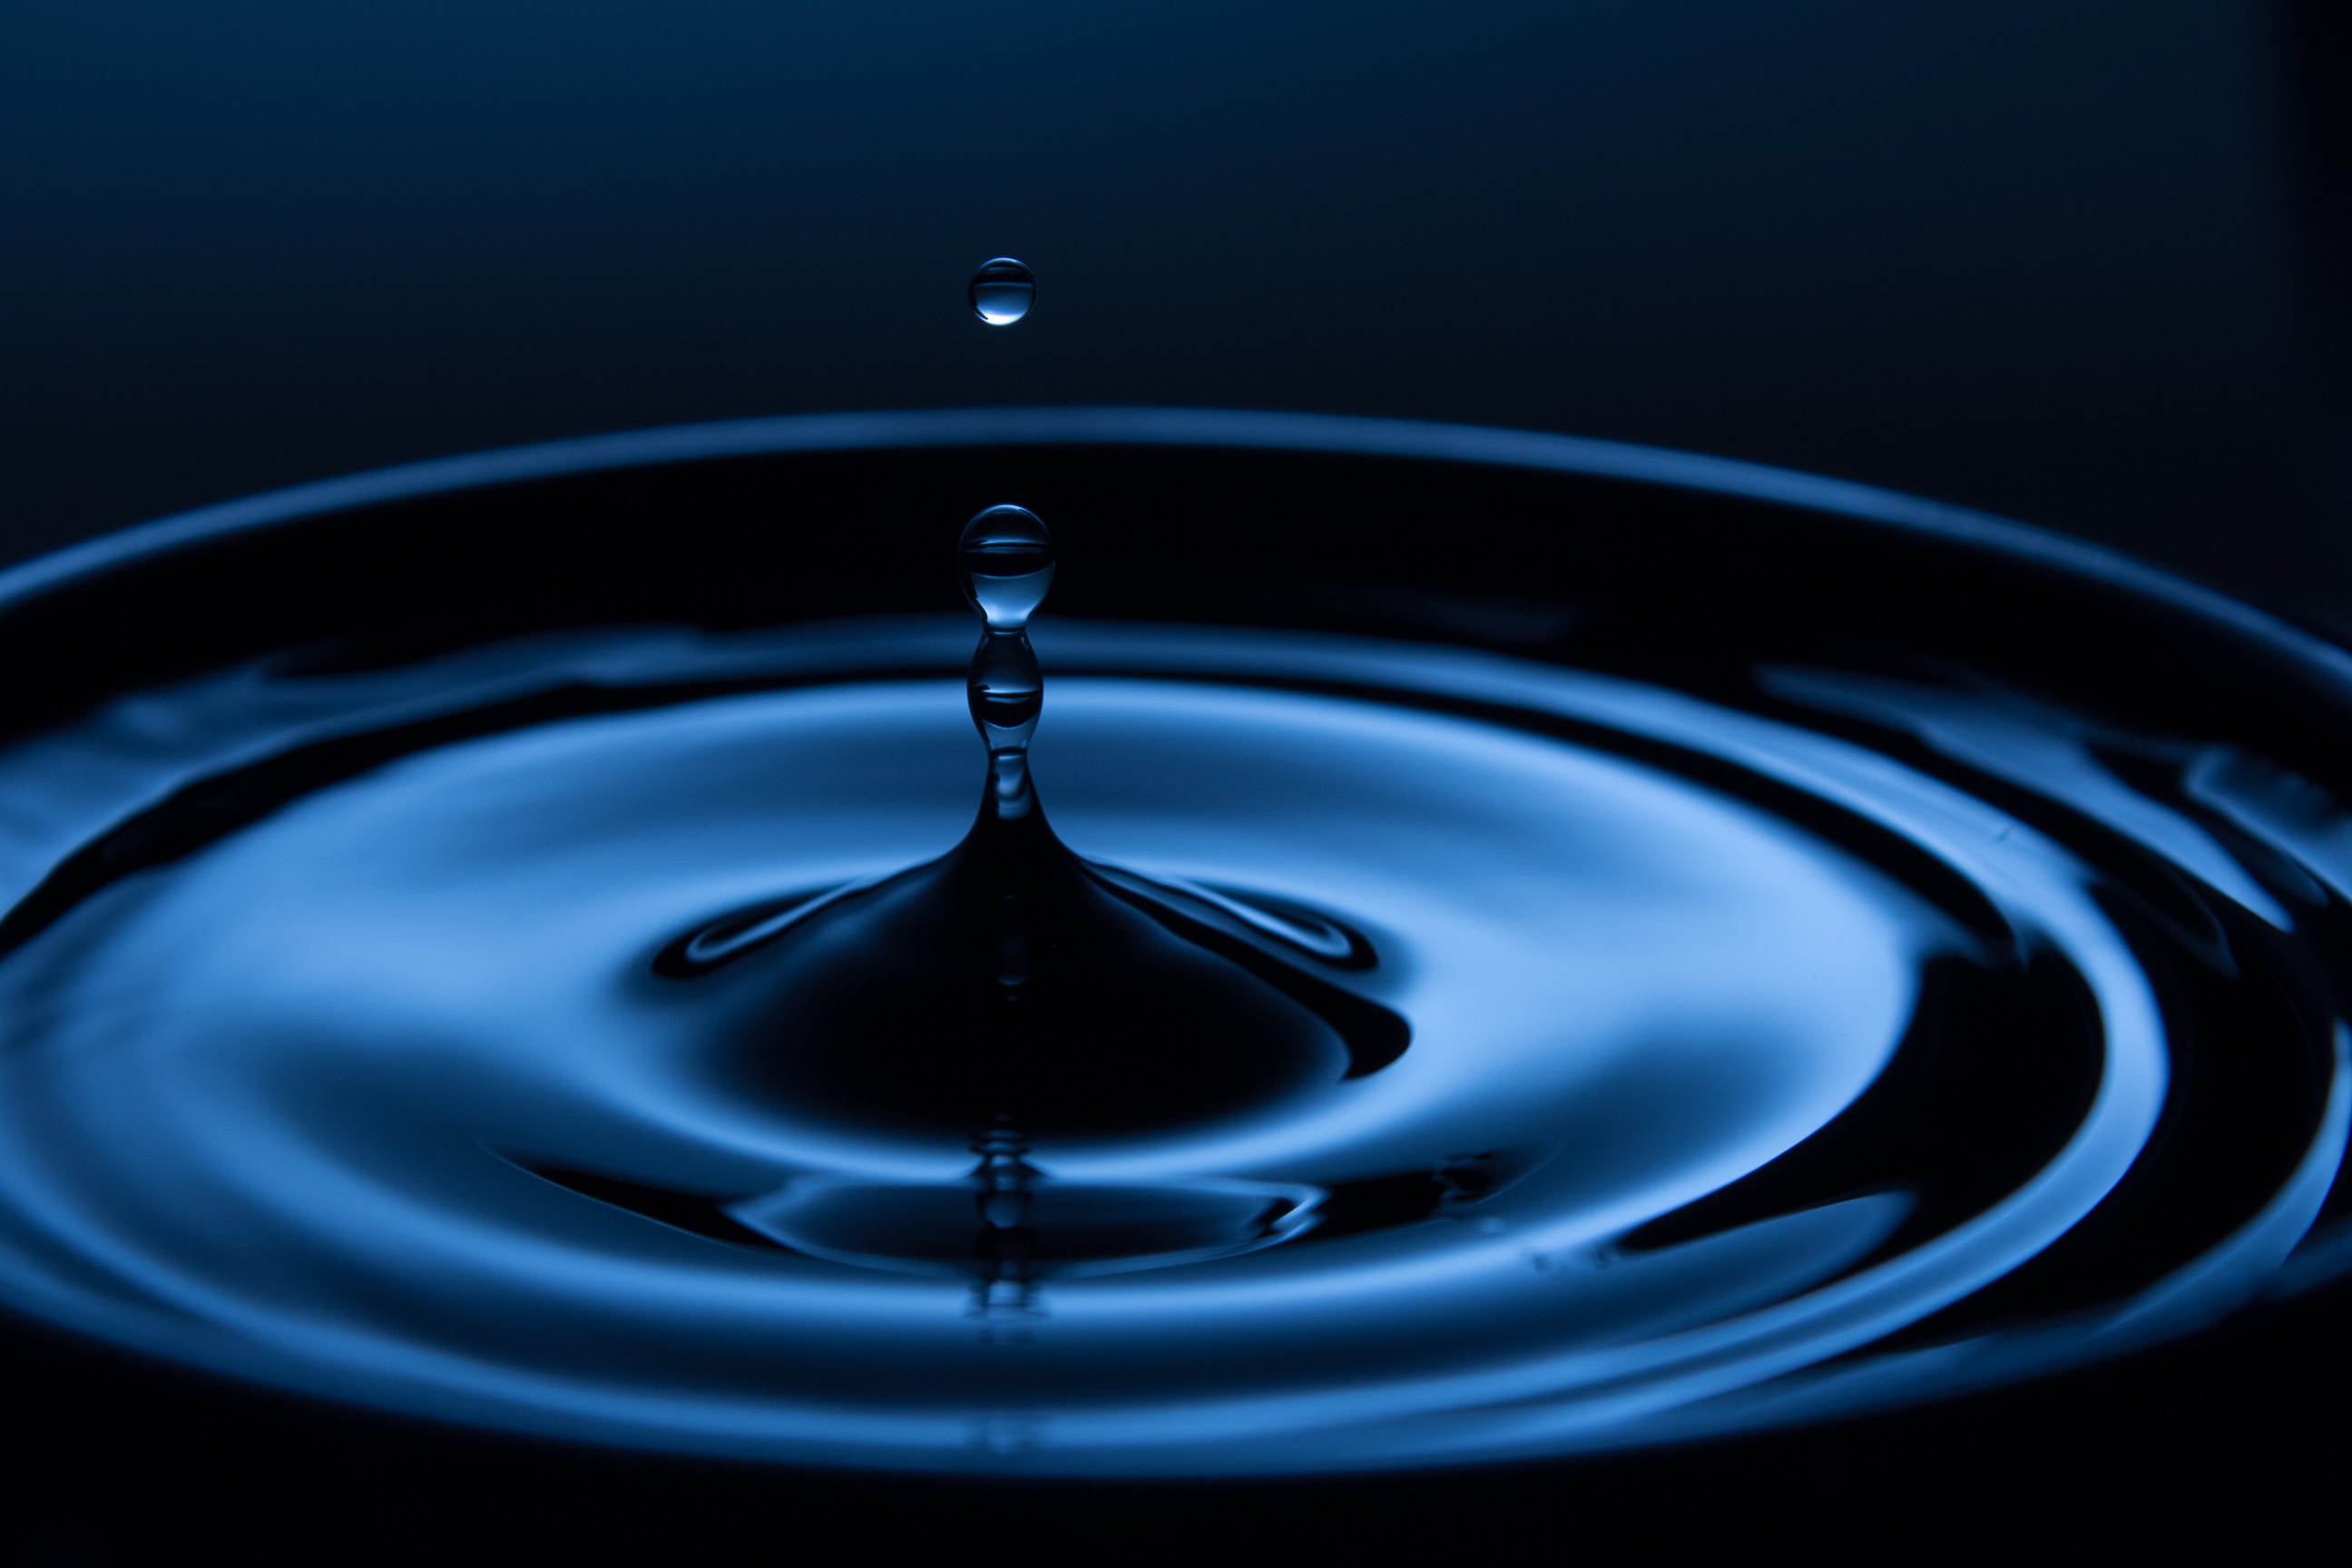 1024x1024 Water Drop 1024x1024 Resolution Hd 4k Wallpapers Images Backgrounds Photos And Pictures